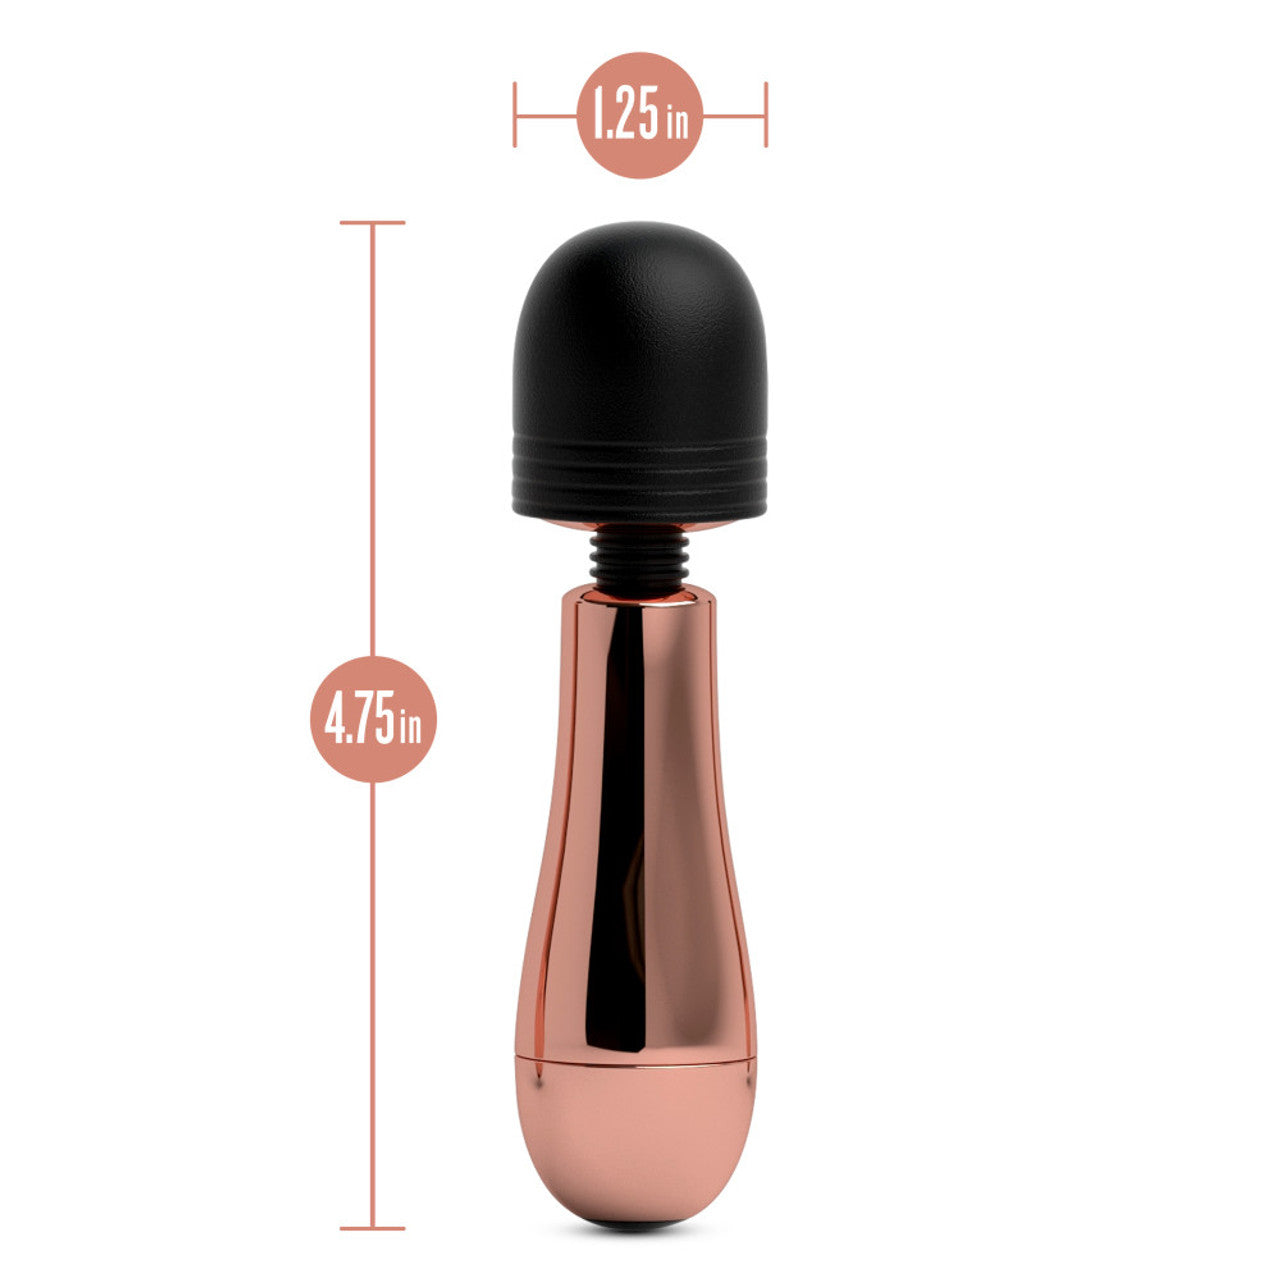 Lush Chloe Rechargeable Vibrator - Rose Gold - Thorn & Feather Sex Toy Canada